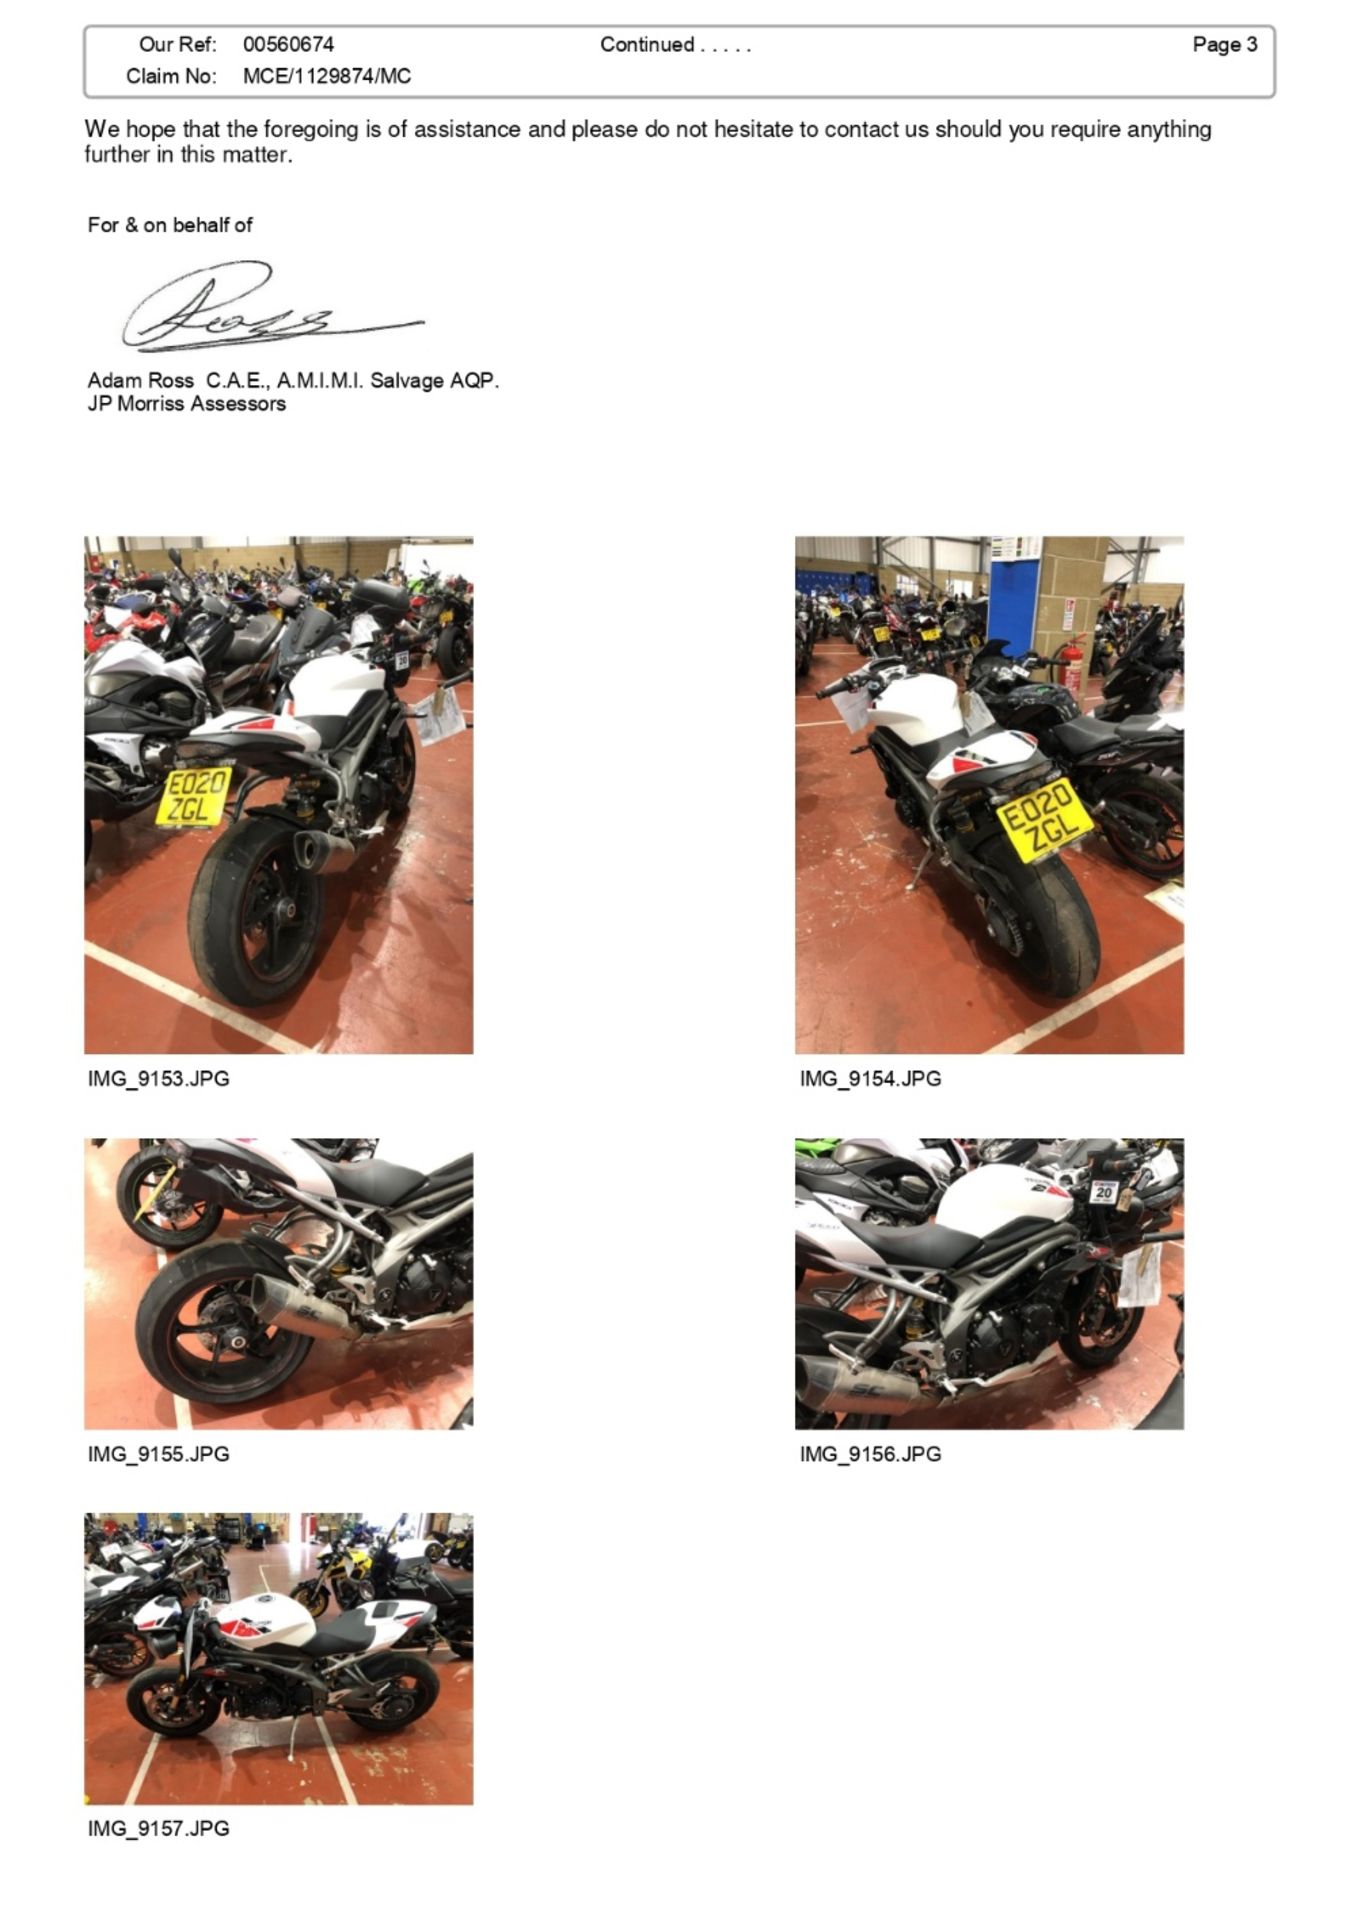 EO20 ZGL Triumph Speed Triple RS 1050 Motorcycle - Image 11 of 15